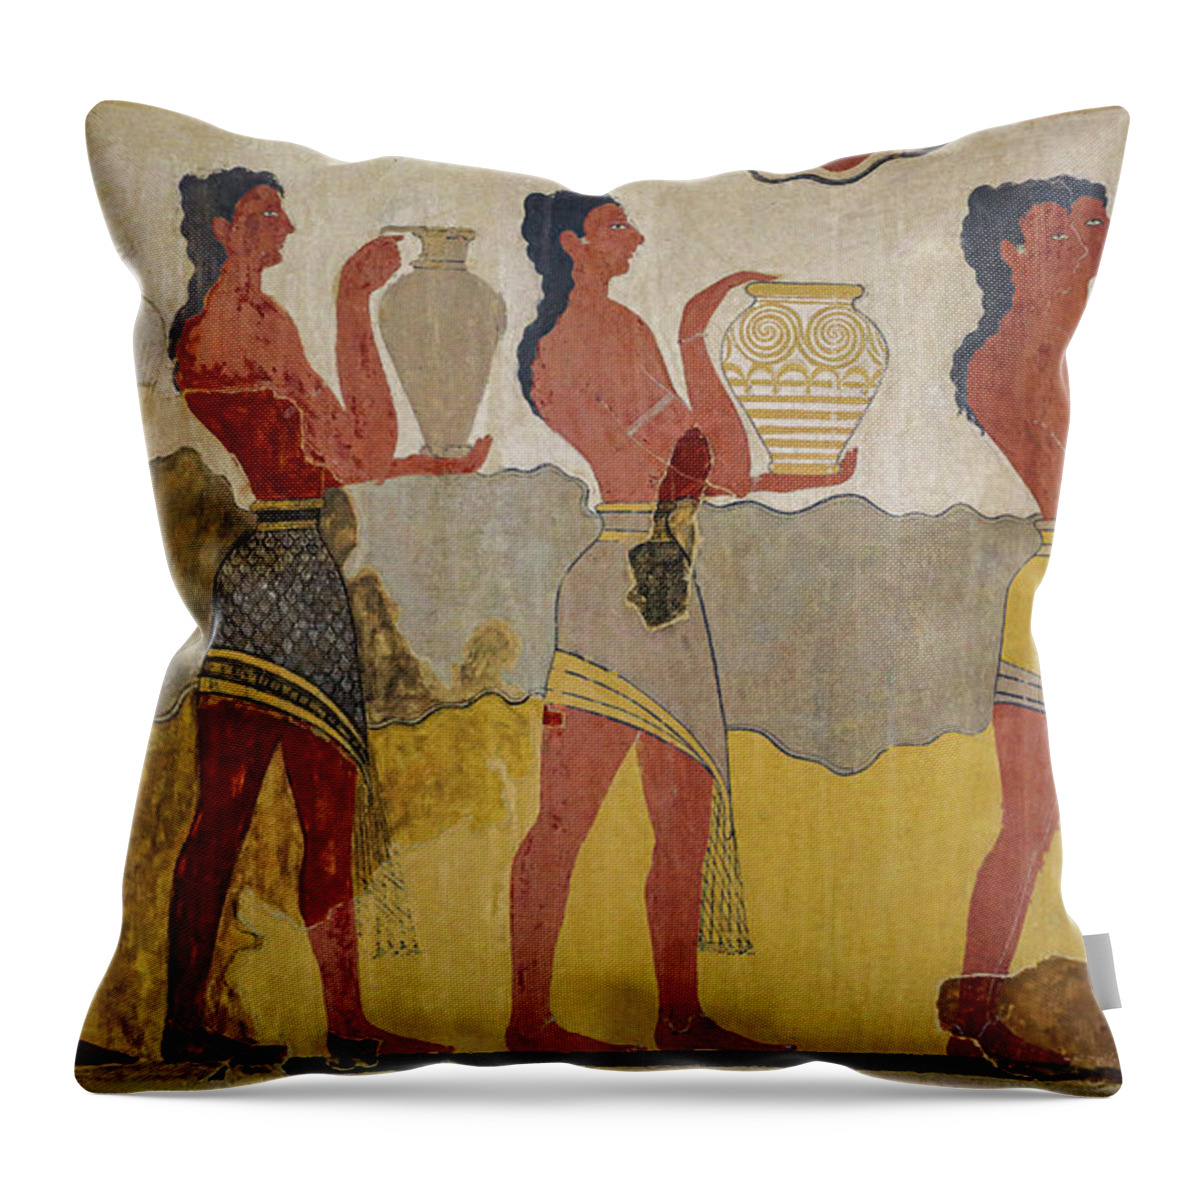 Antiquity Throw Pillow featuring the painting Reconstruction Of The Procession Fresco, 1500- 1400 Bc by Minoan